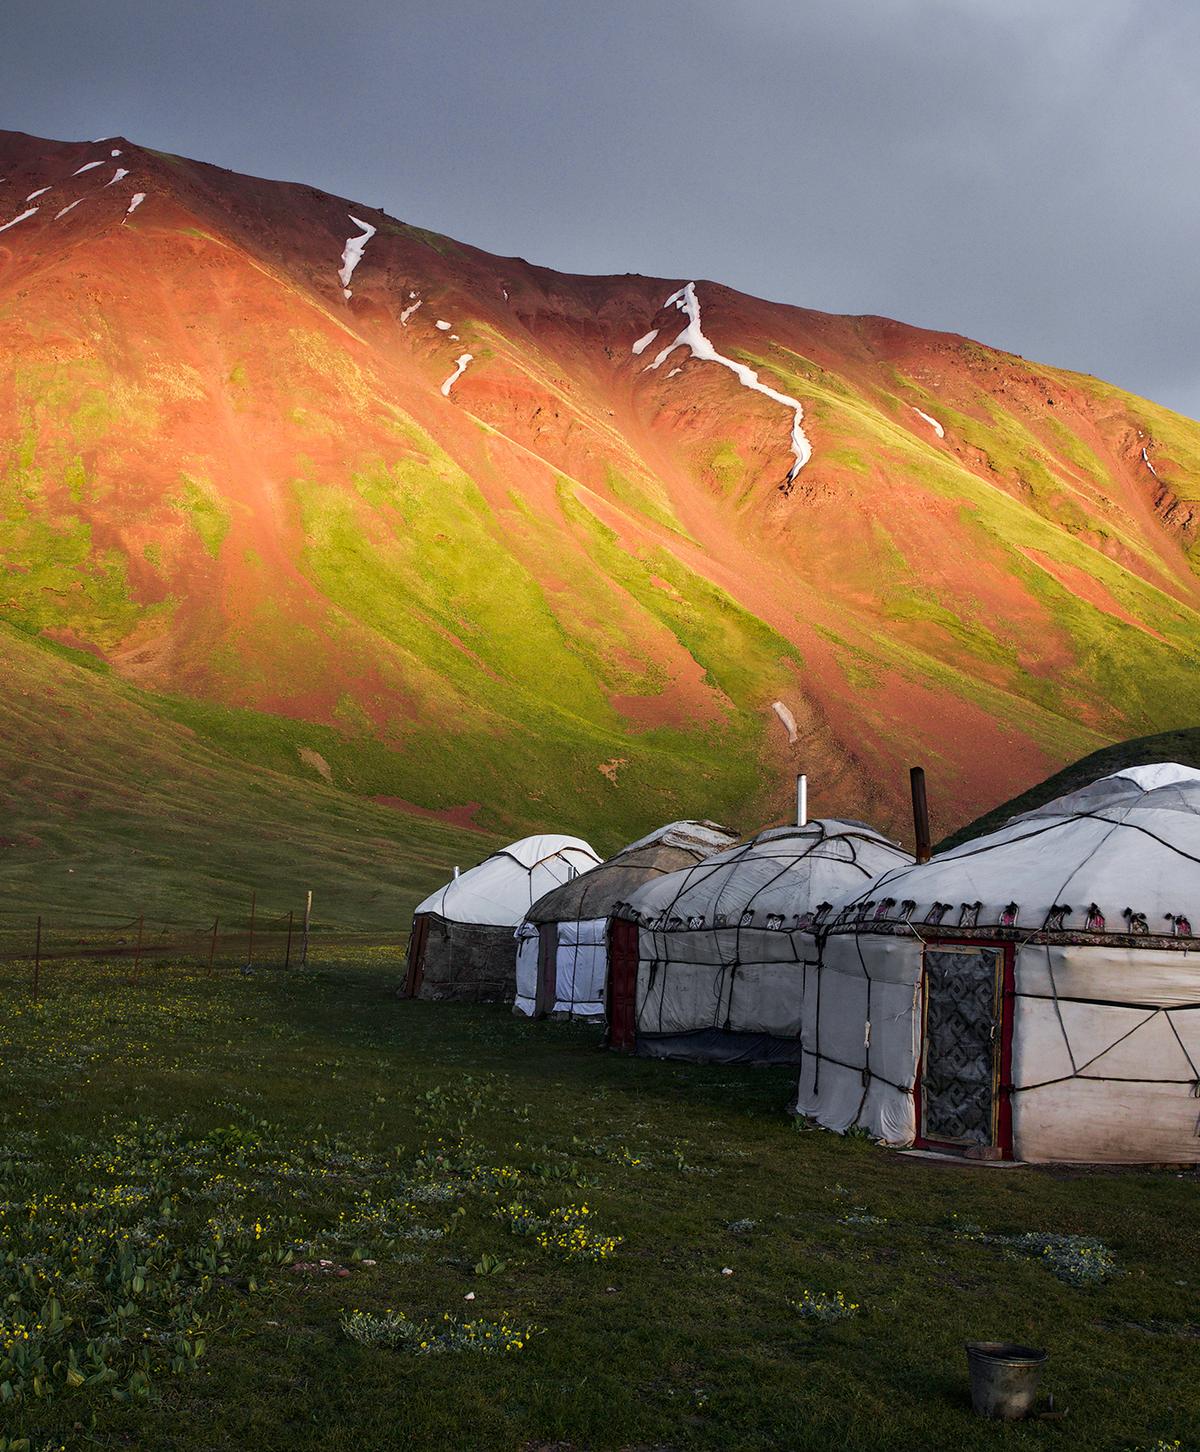 A yurt camp shines in the sunlight beneath an iconic red and green mountain in Kyrgyzstan